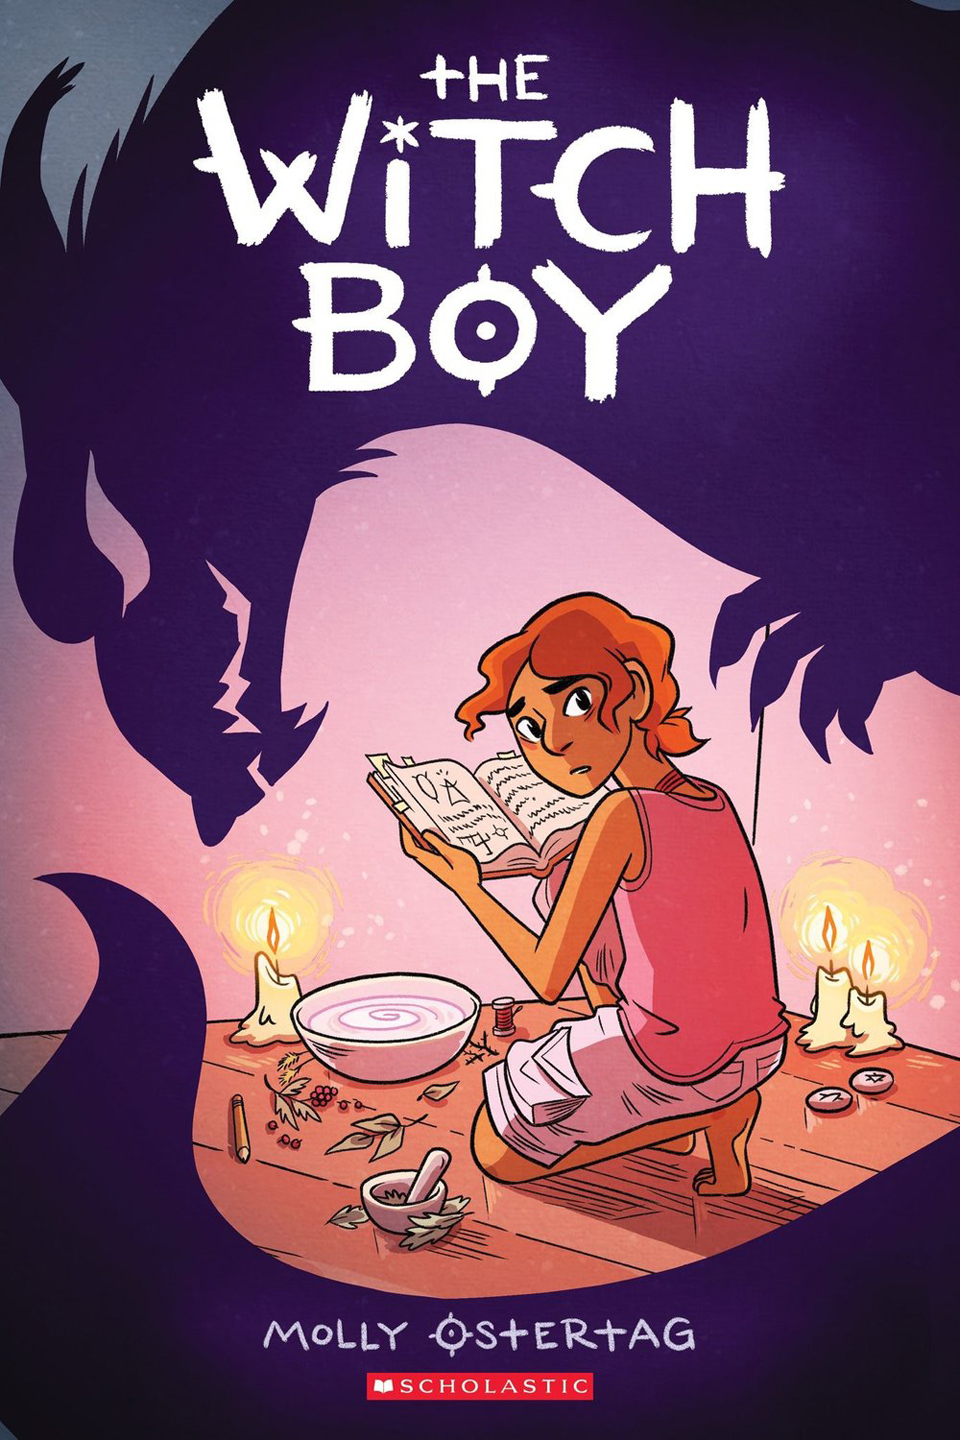 The Witch Boy by Molly Ostertag